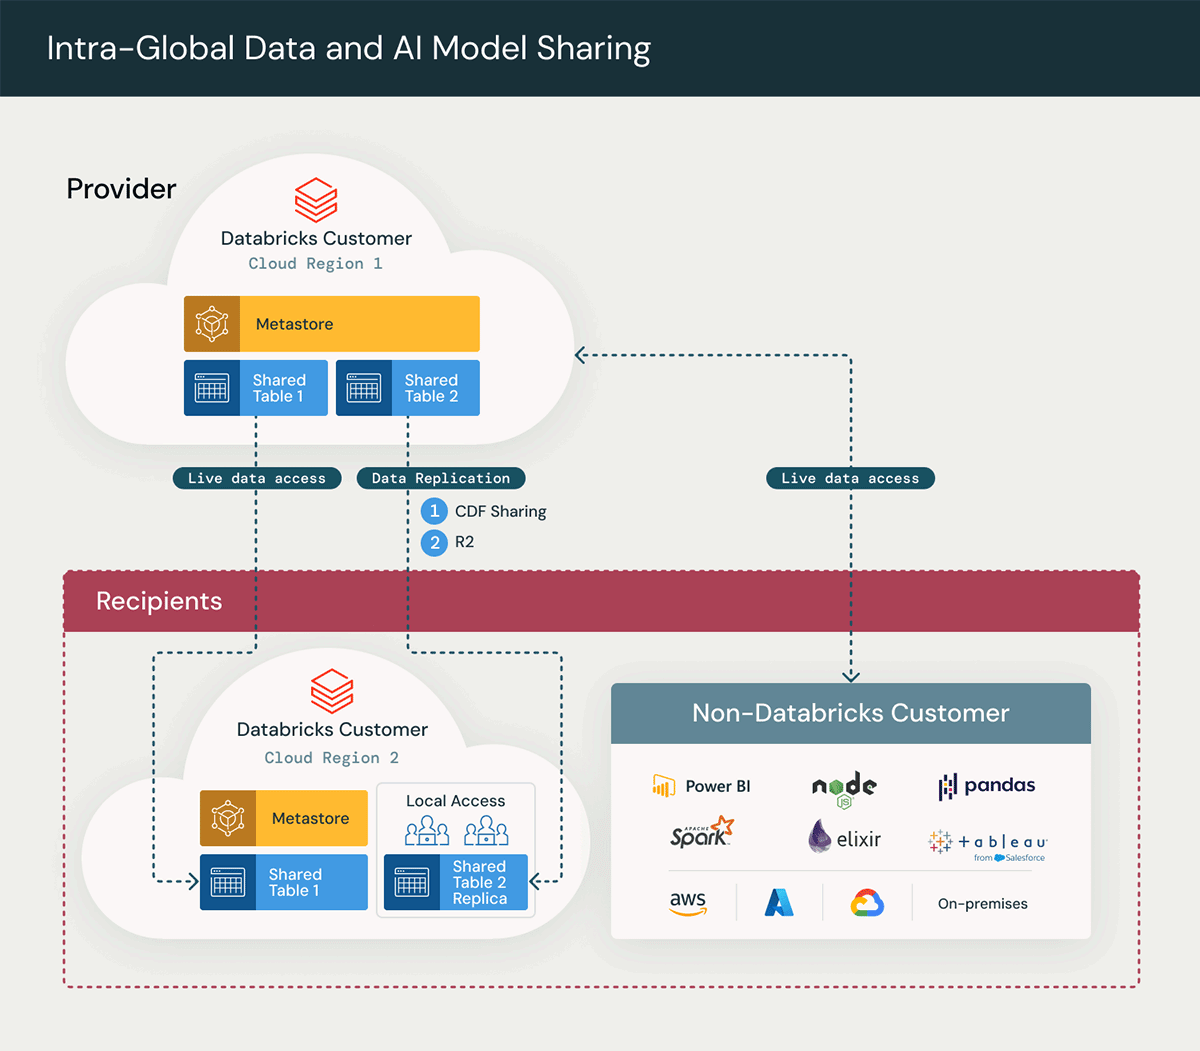 Intra-Global Data and AI Model Sharing